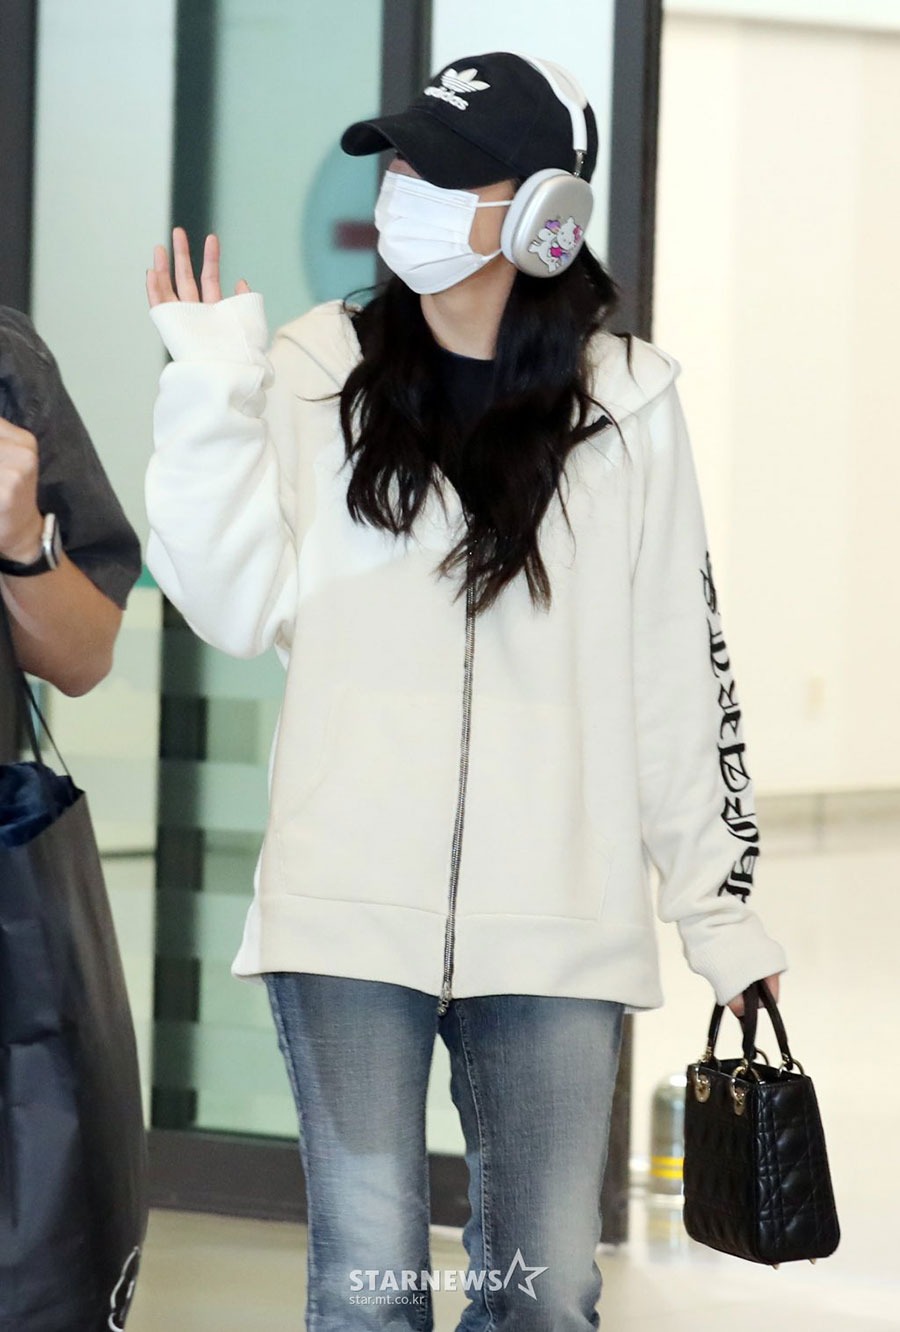 ELLE Indonesia Magazine on X: Spotted! Wearing the newest 30 Montaigne  Avenue bag collection by @Dior, @BLACKPINK's #JISOO was seen at the Incheon  airport to catch a flight to attend the #DiorAW23